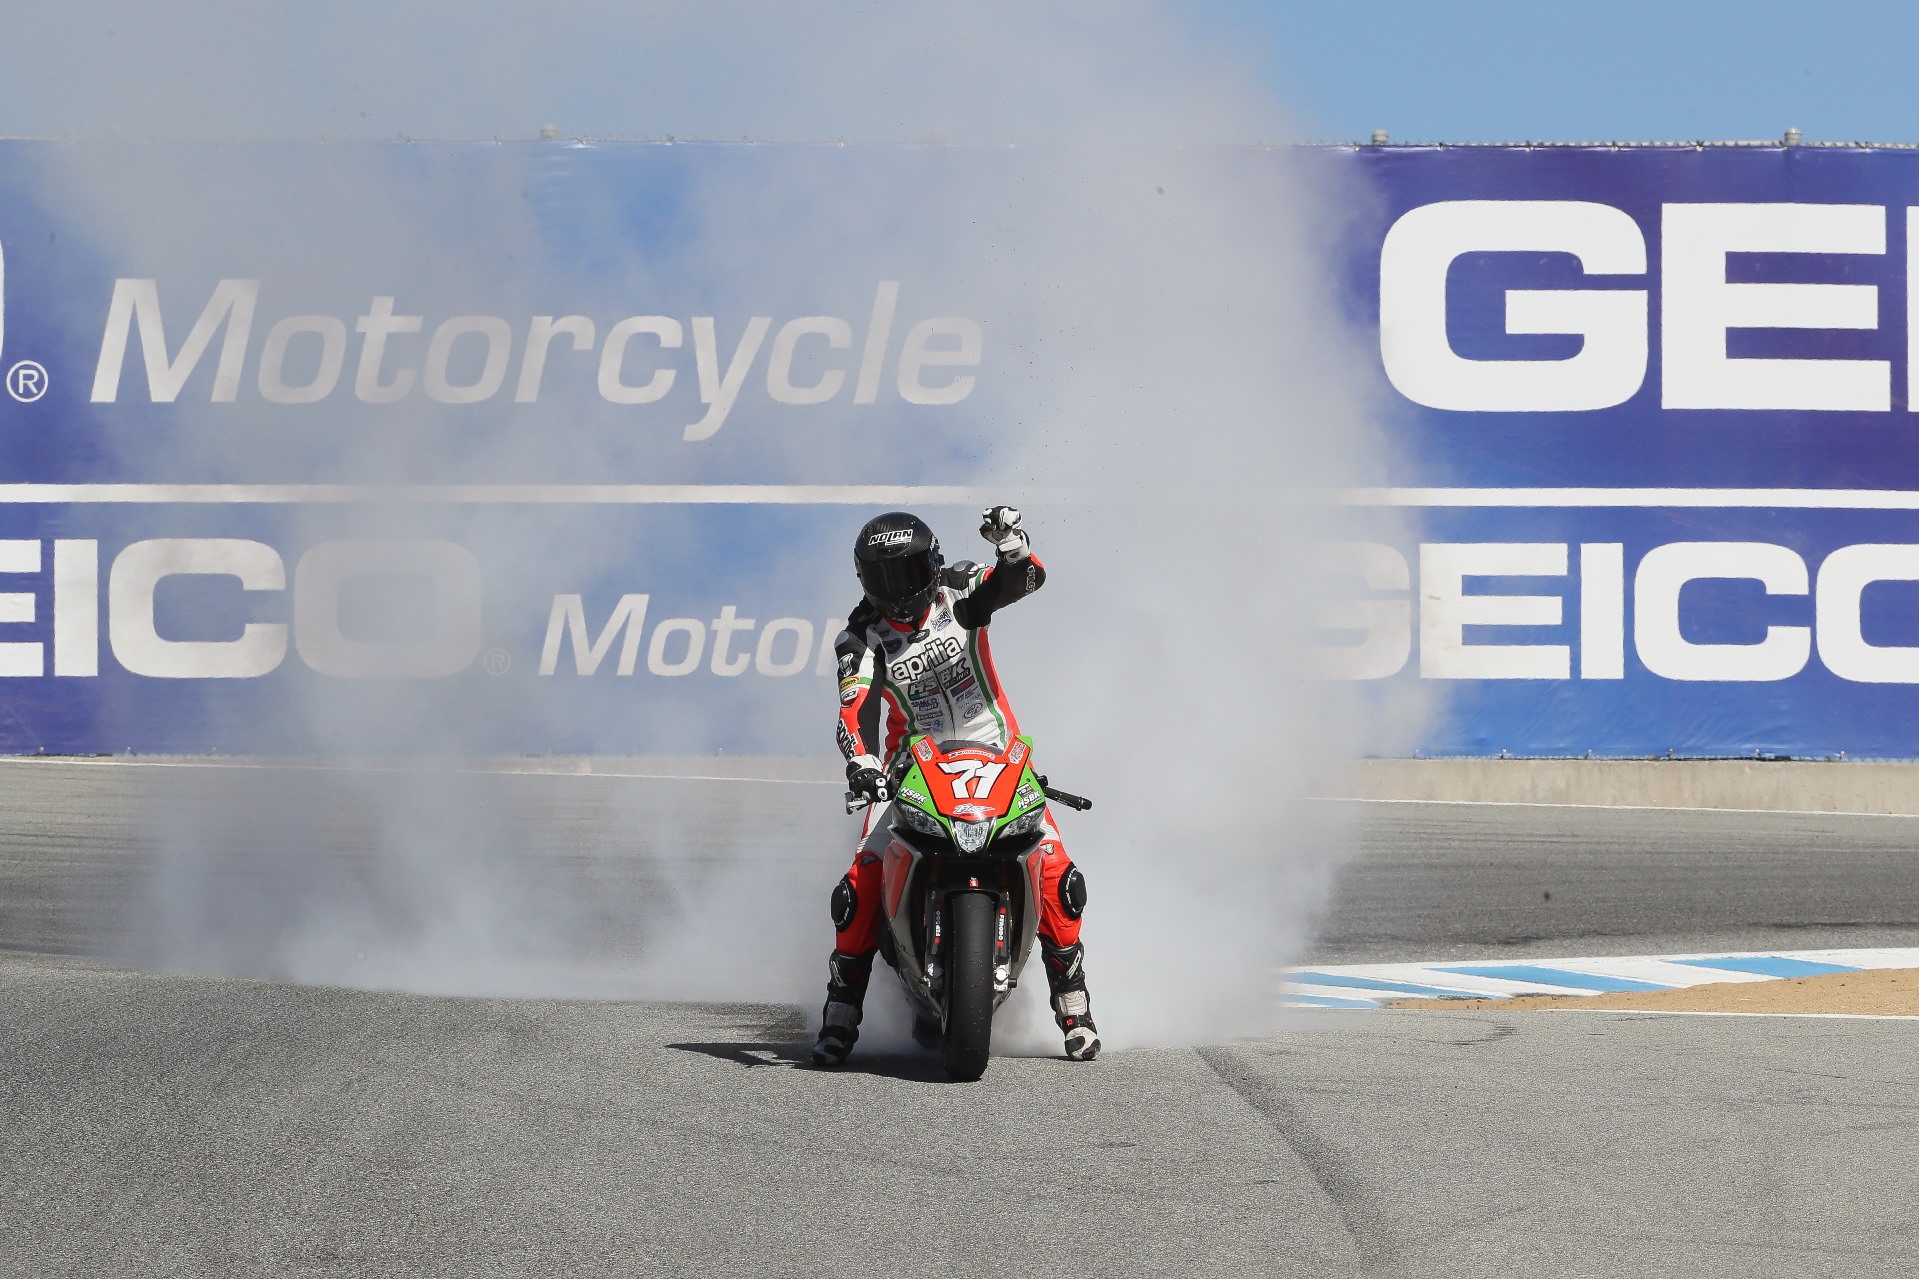 CORTI AND APRILIA HSBK LEAVE LAGUNA WITH TAINTED HARDWARE, UNNERVED SPIRITS